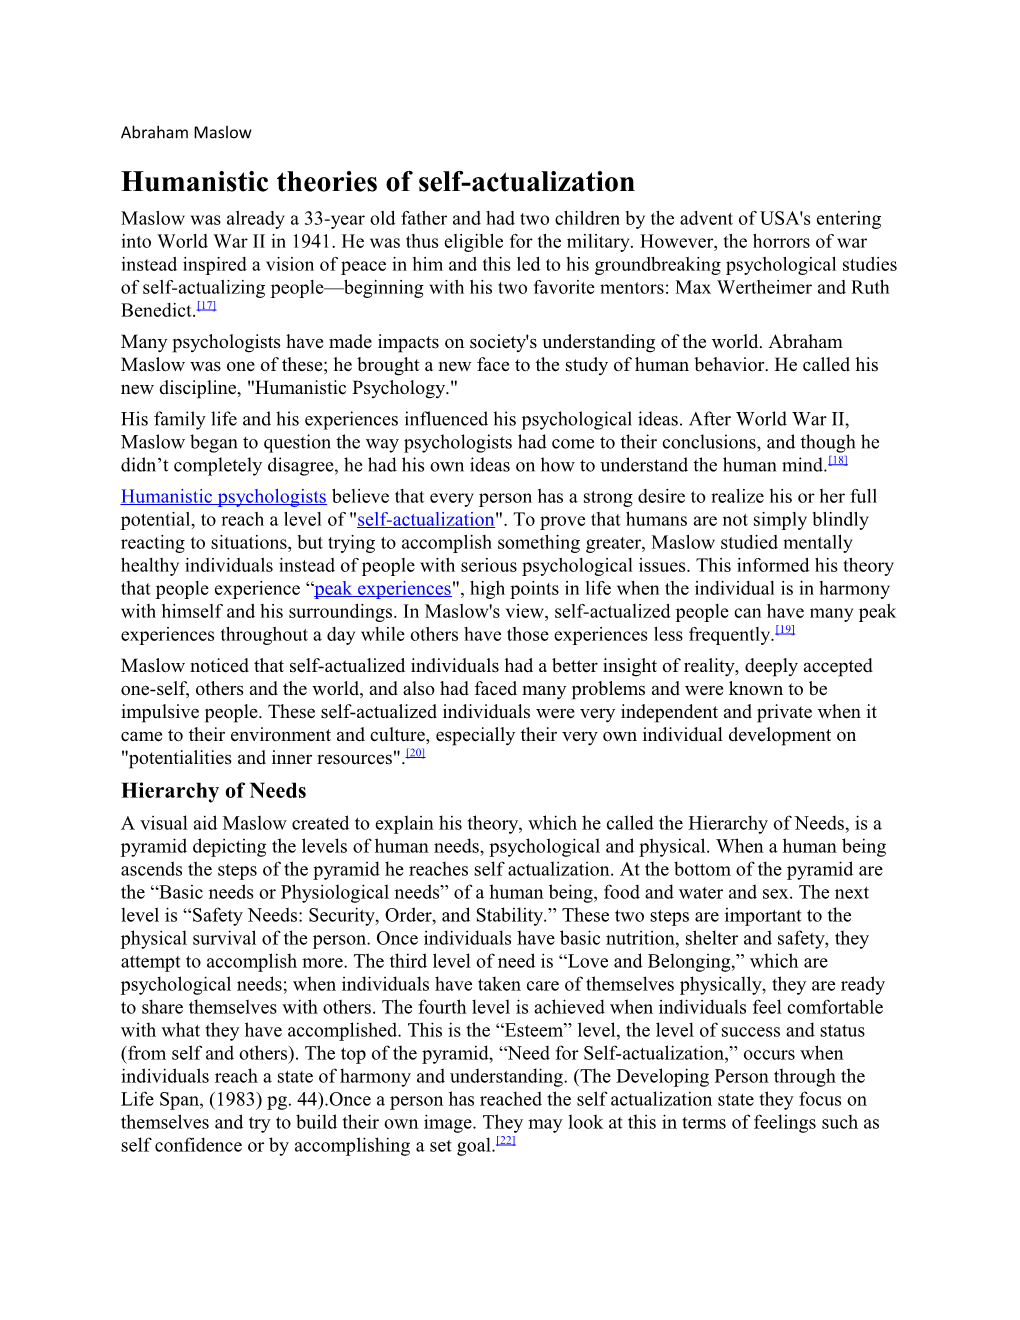 Humanistic Theories of Self-Actualization